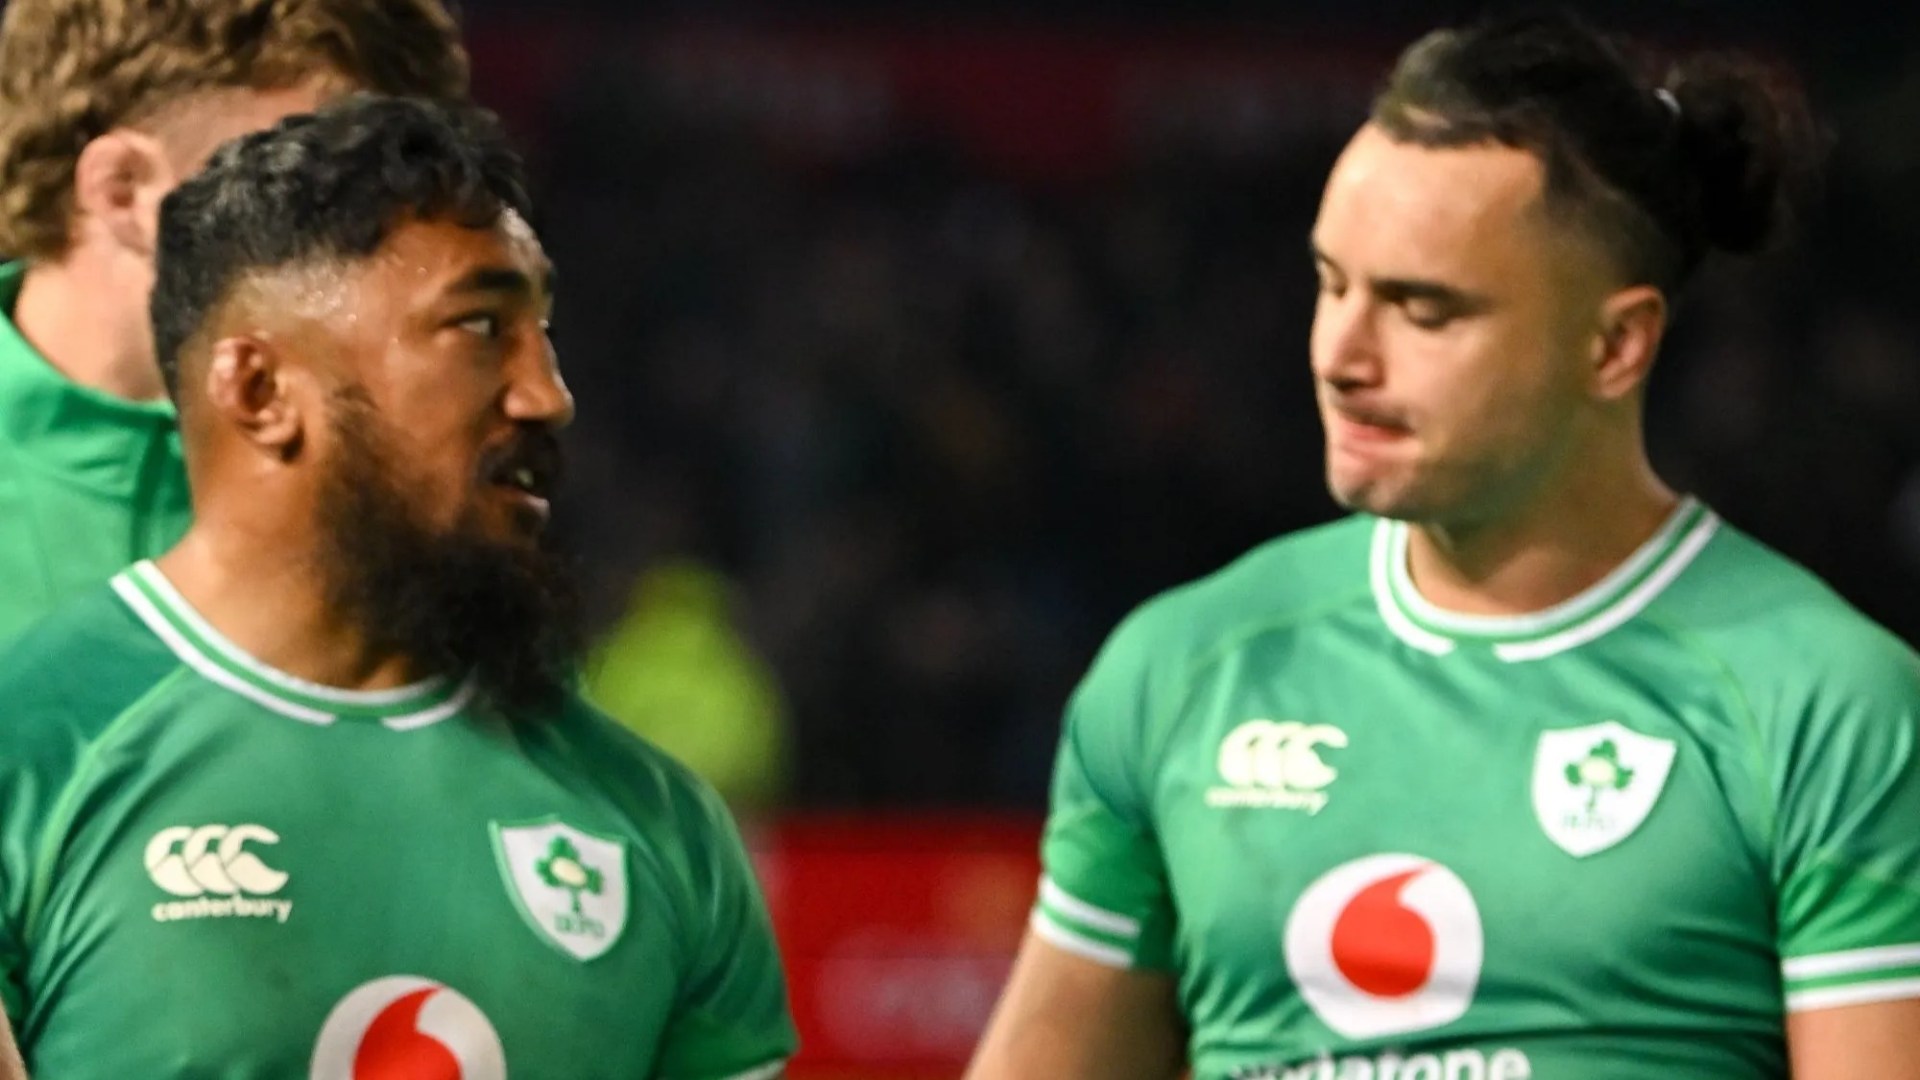 Ireland coach gives injury update on FIVE stars after bruising opening Test against South Africa ahead of second clash [Video]